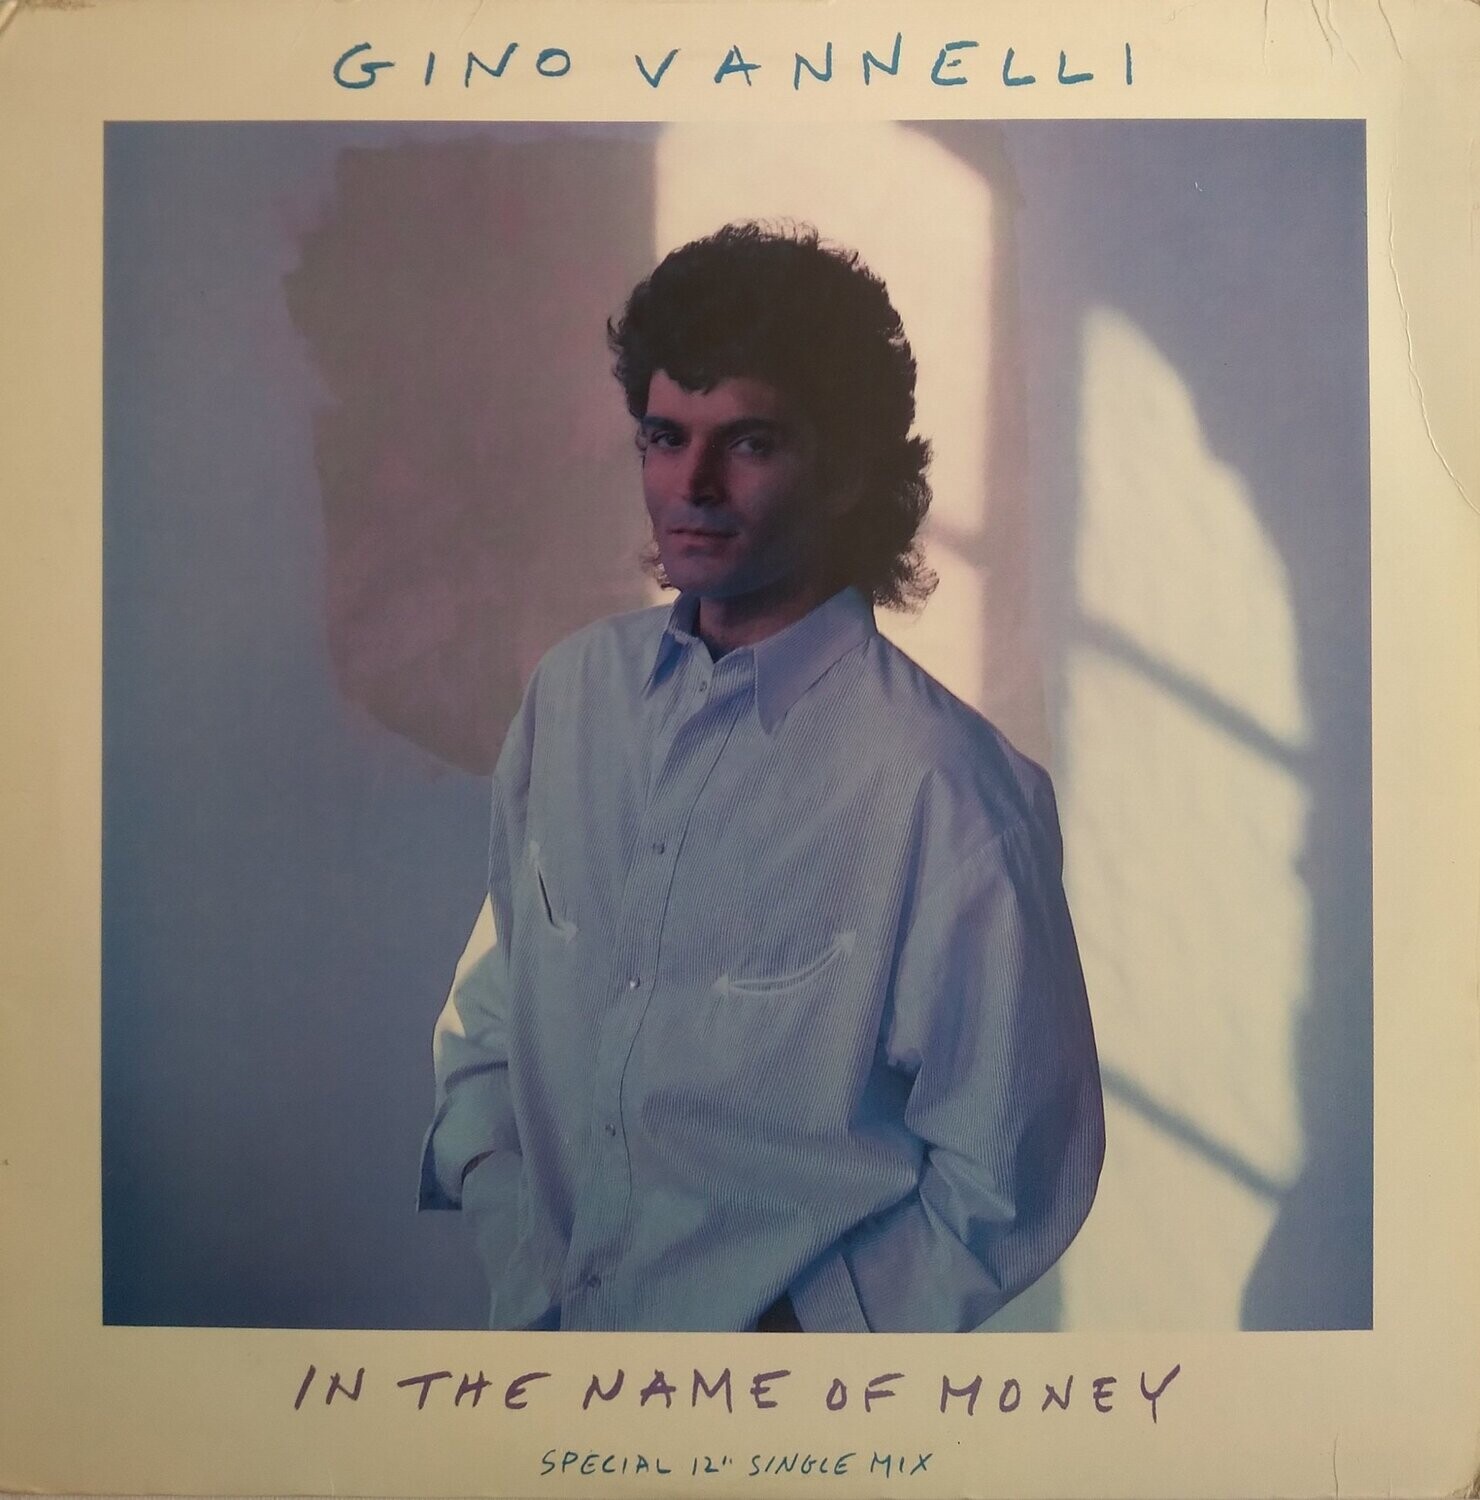 Gino Vannelli – In The Name Of Money (Special 12" Single Mix) 1987